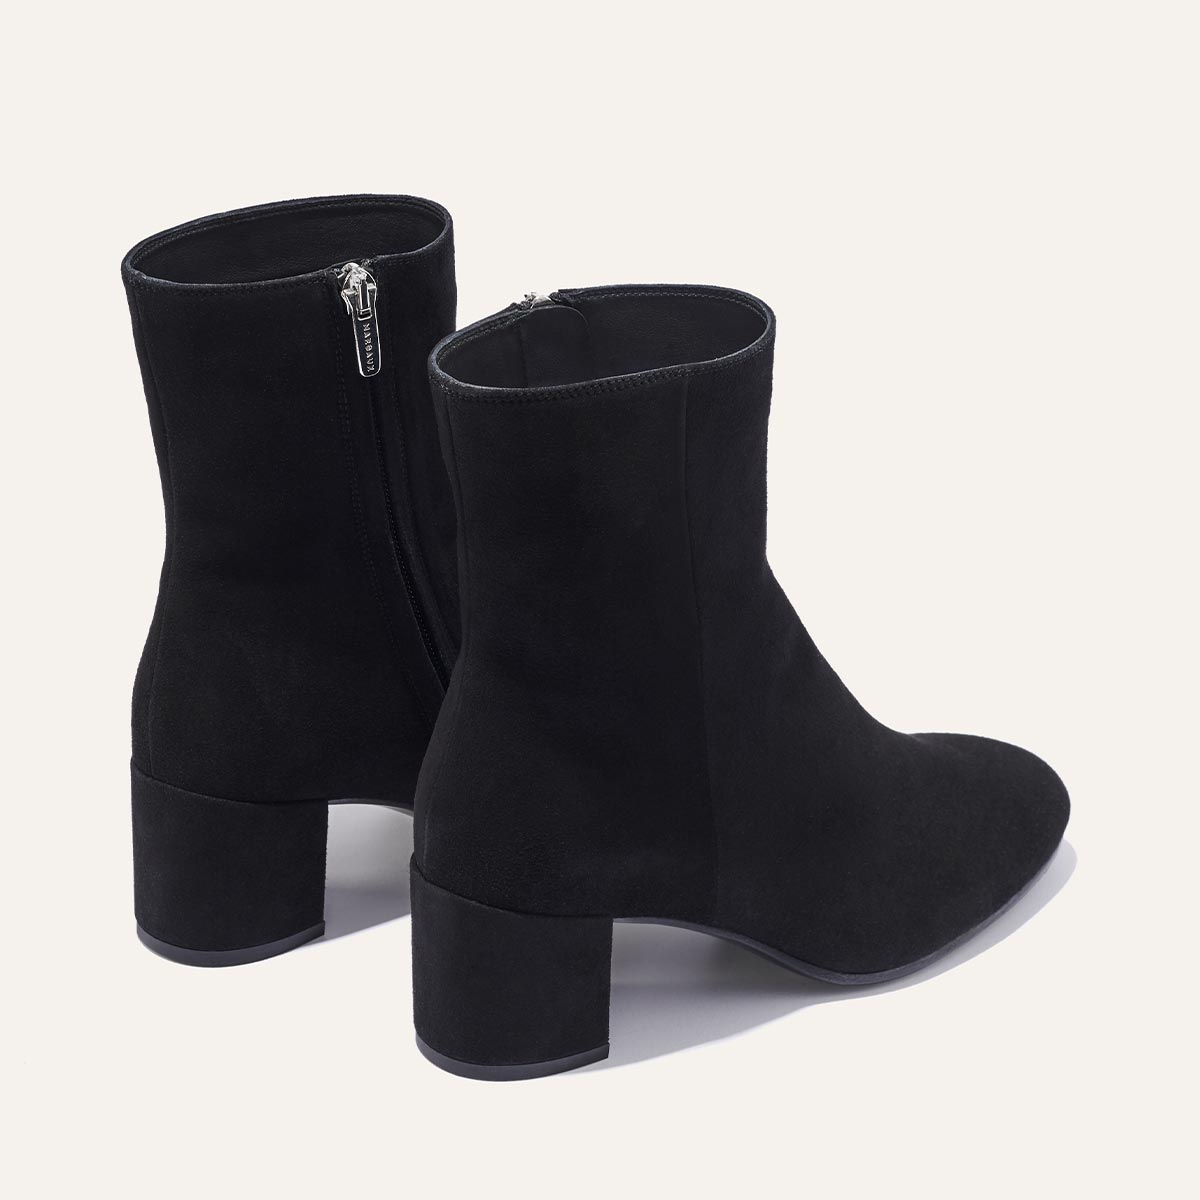 The Boot - Black Suede